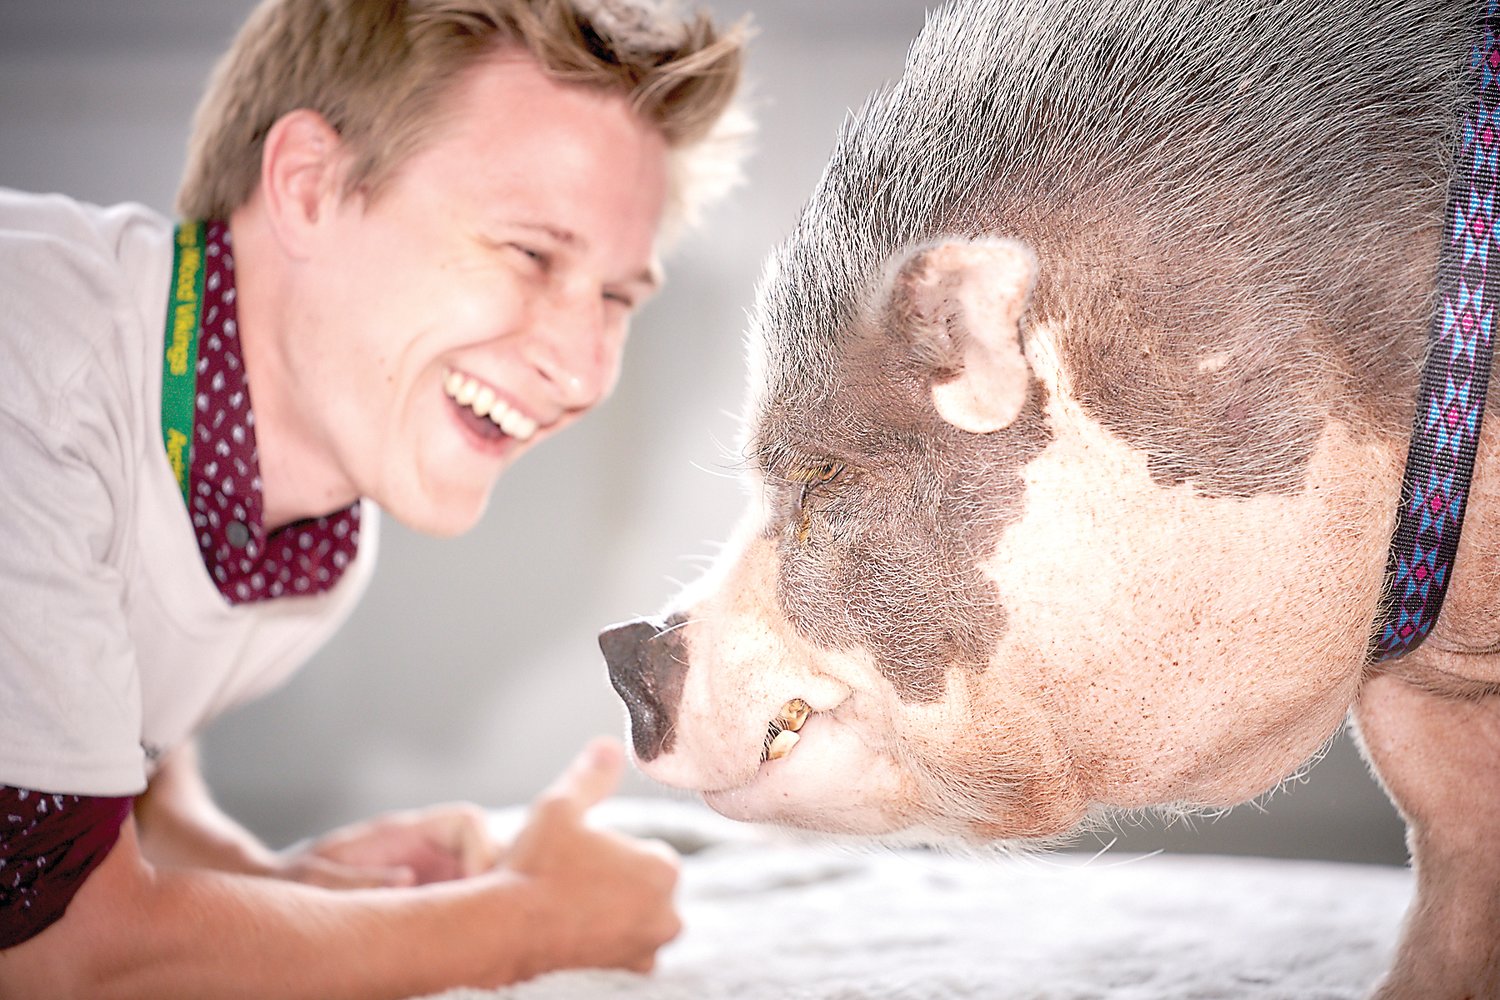 Steven Waskie, a teacher at Archbishop Wood High School in Warminster,  puckers up with Raines the potbellied pig for a good cause. Photograph courtesy of Hy Paul Photography.